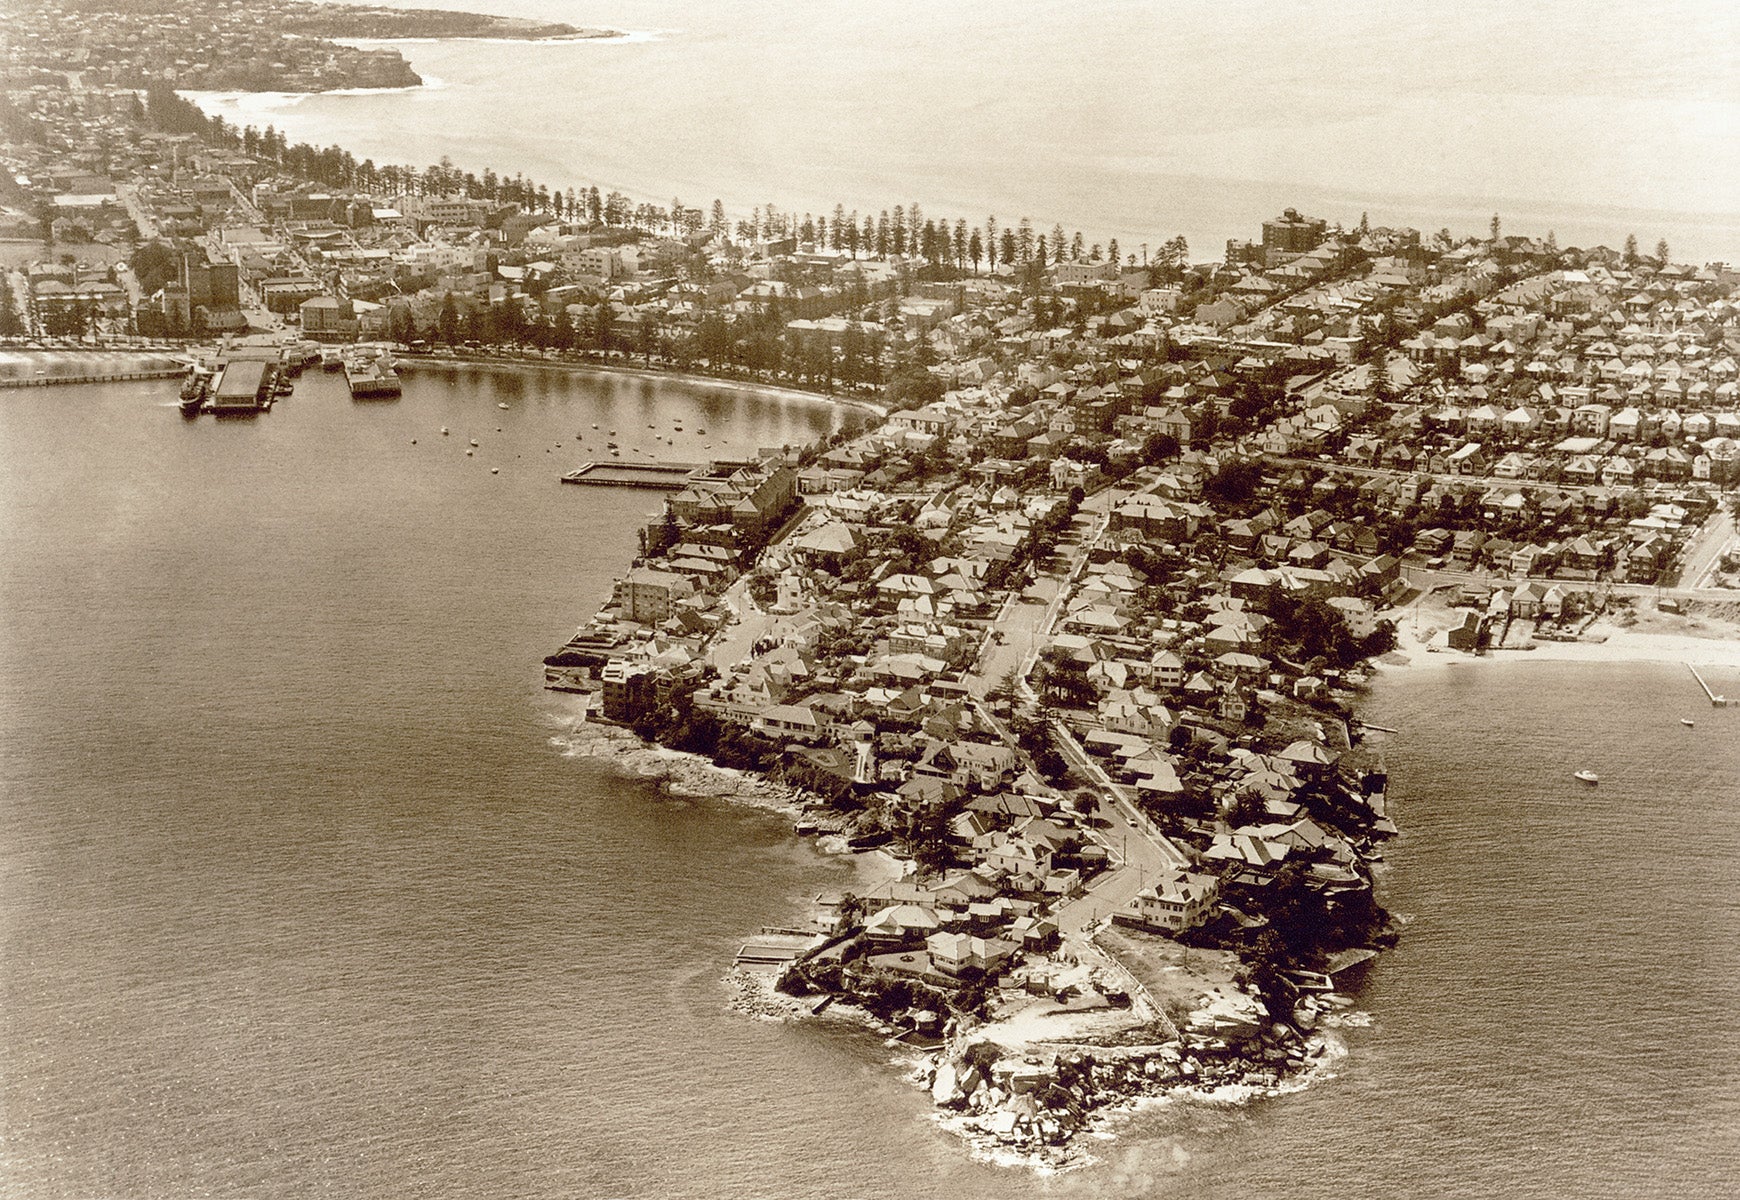 Aerial View Of Town, Manly NSW Australia 1959